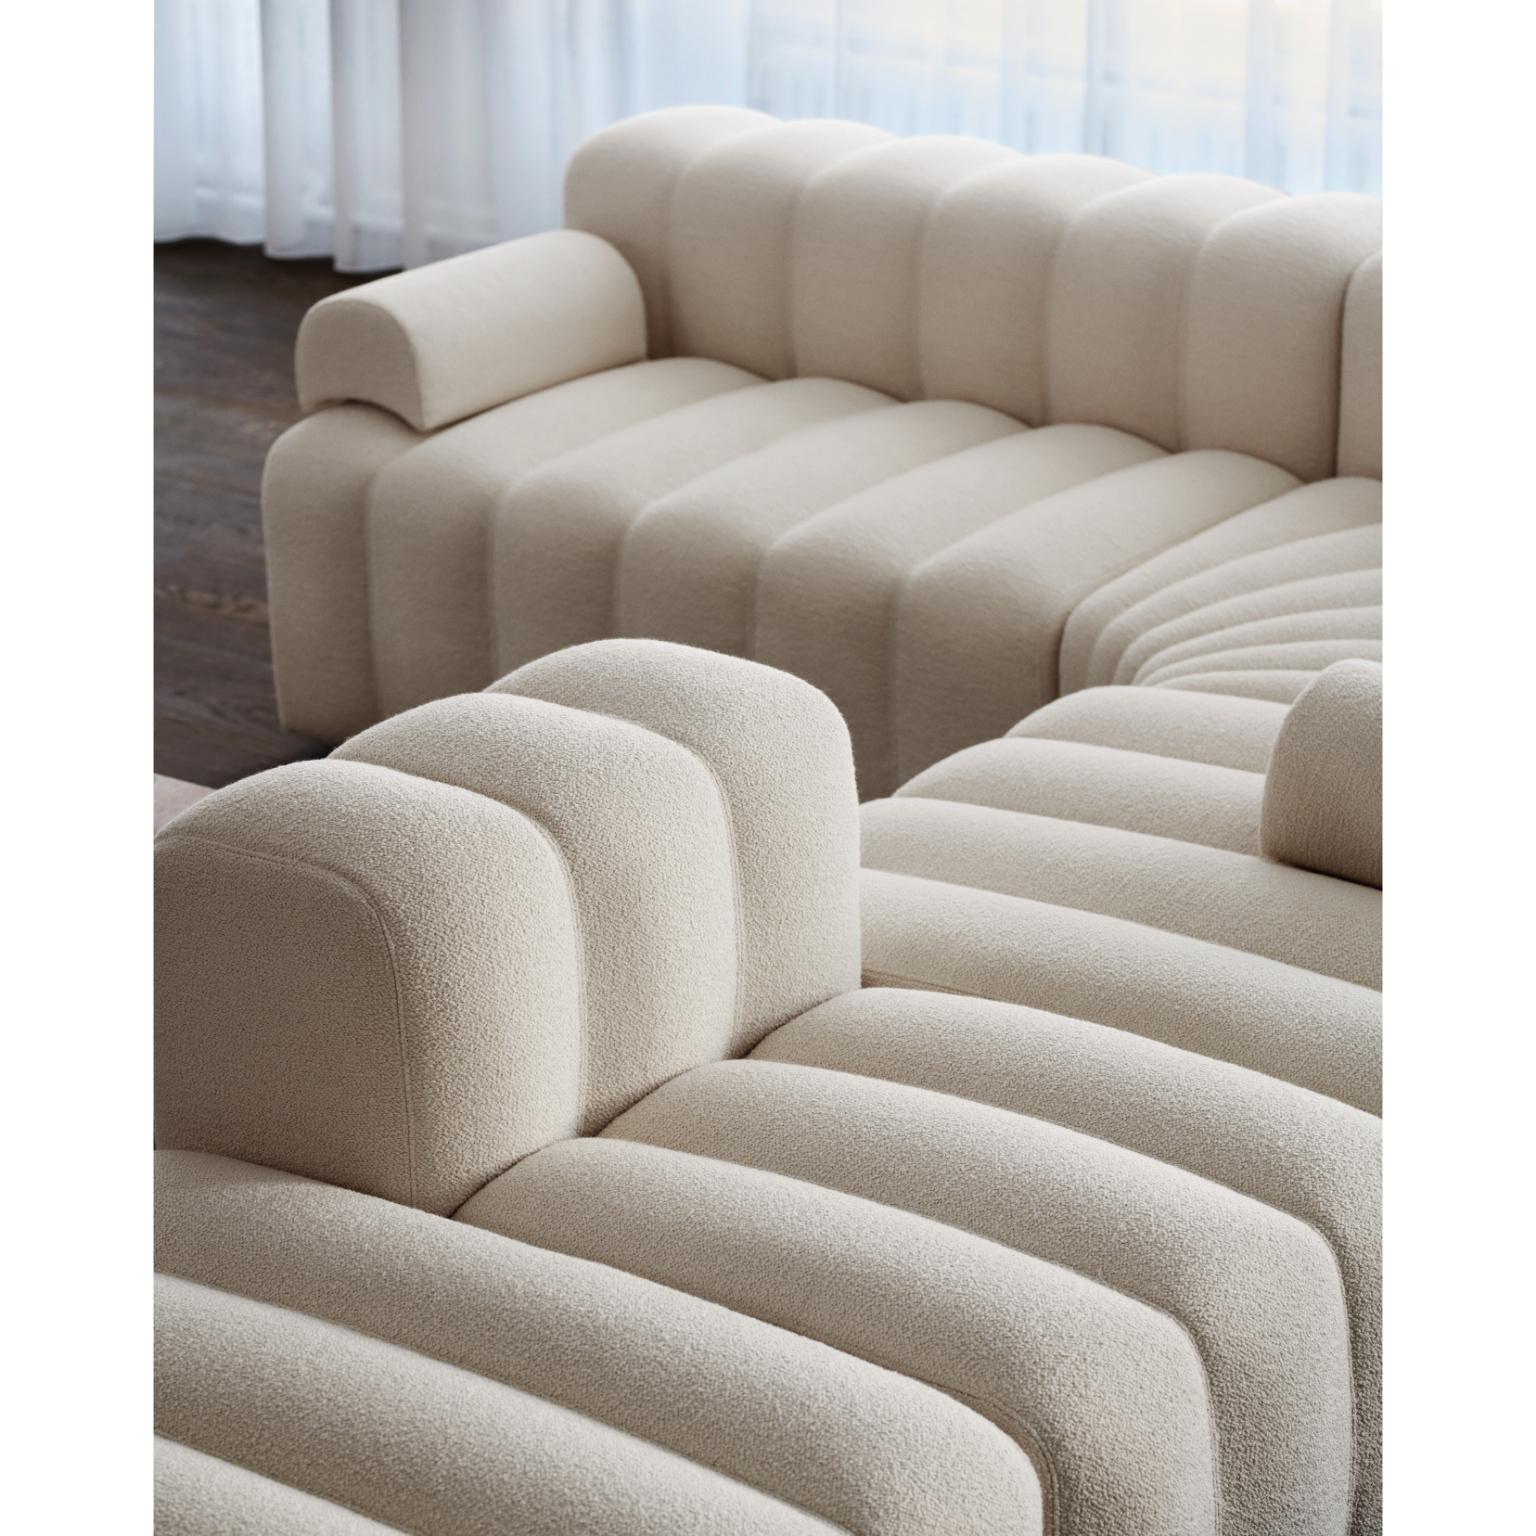 Studio Large Left Modular Sofa With Armrest by NORR11
Dimensions: D 96 x W 153 x H 70 cm. SH 47 cm. 
Materials: Foam, wood and upholstery.
Upholstery: Barnum Boucle Color 3.

Available in different upholstery options. A plywood structure with